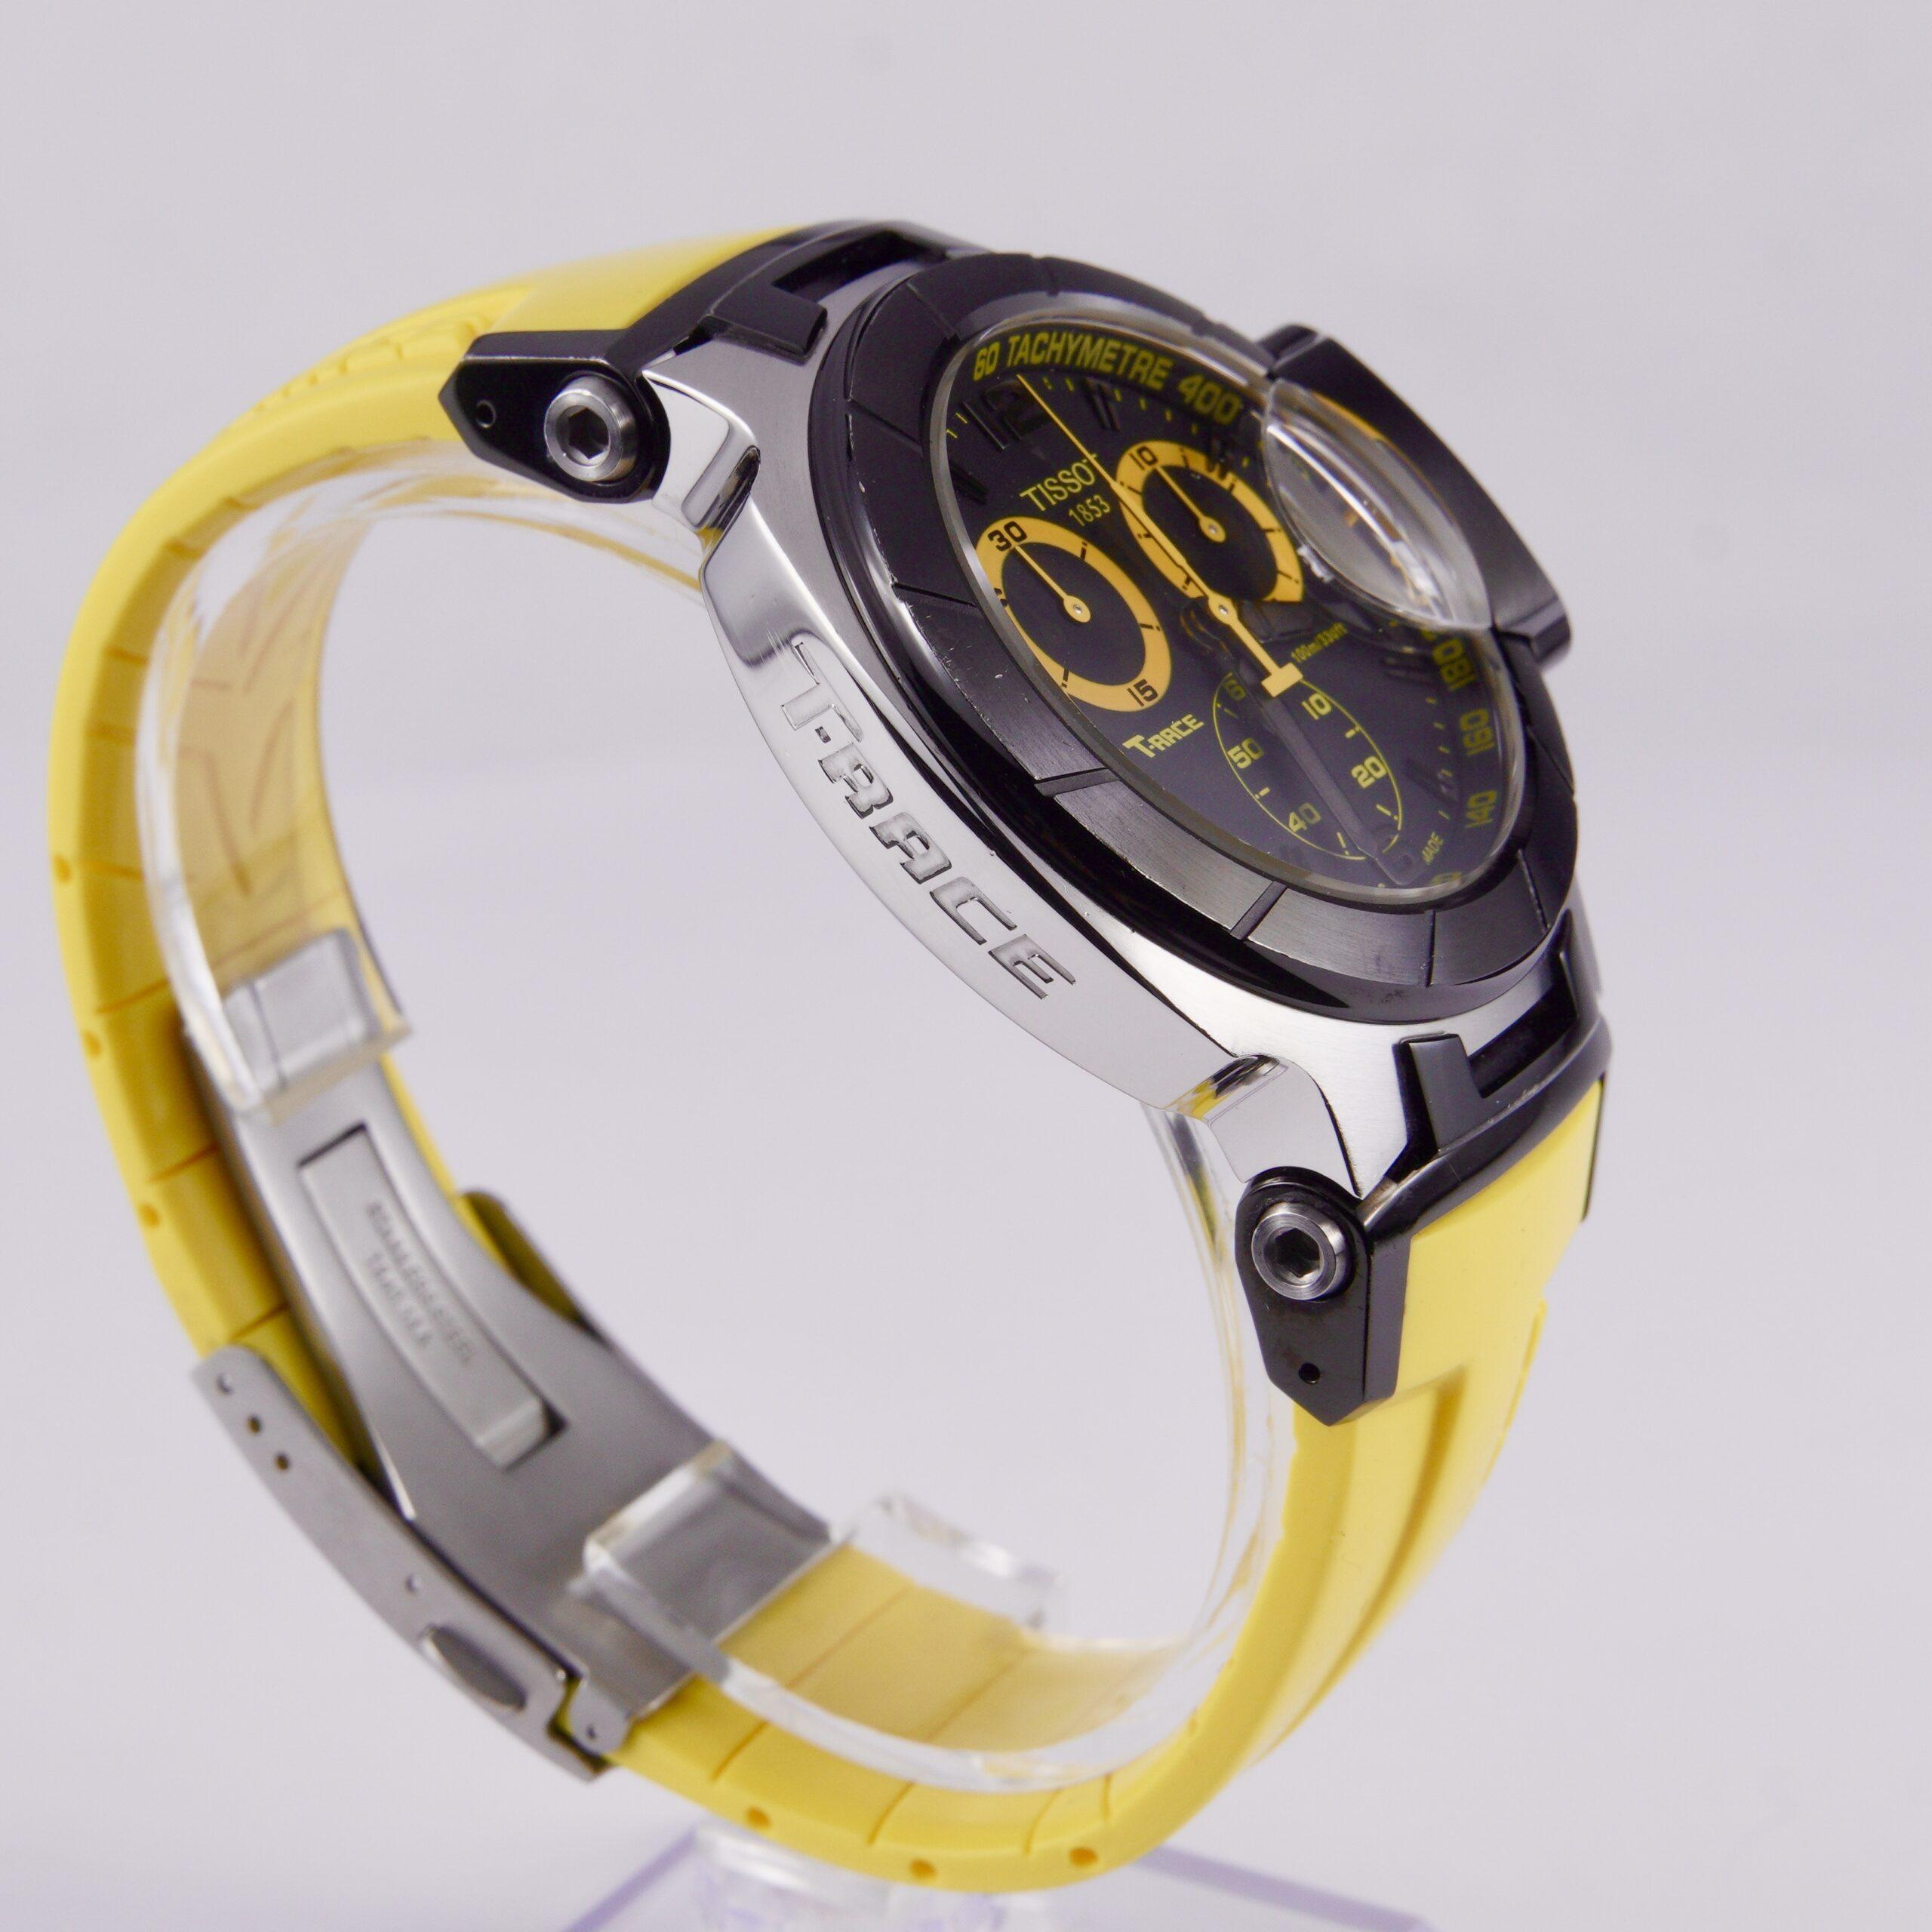 Tissot T-Race T048417A Chronograph Yellow Band Watch | Barry's Pawn and ...